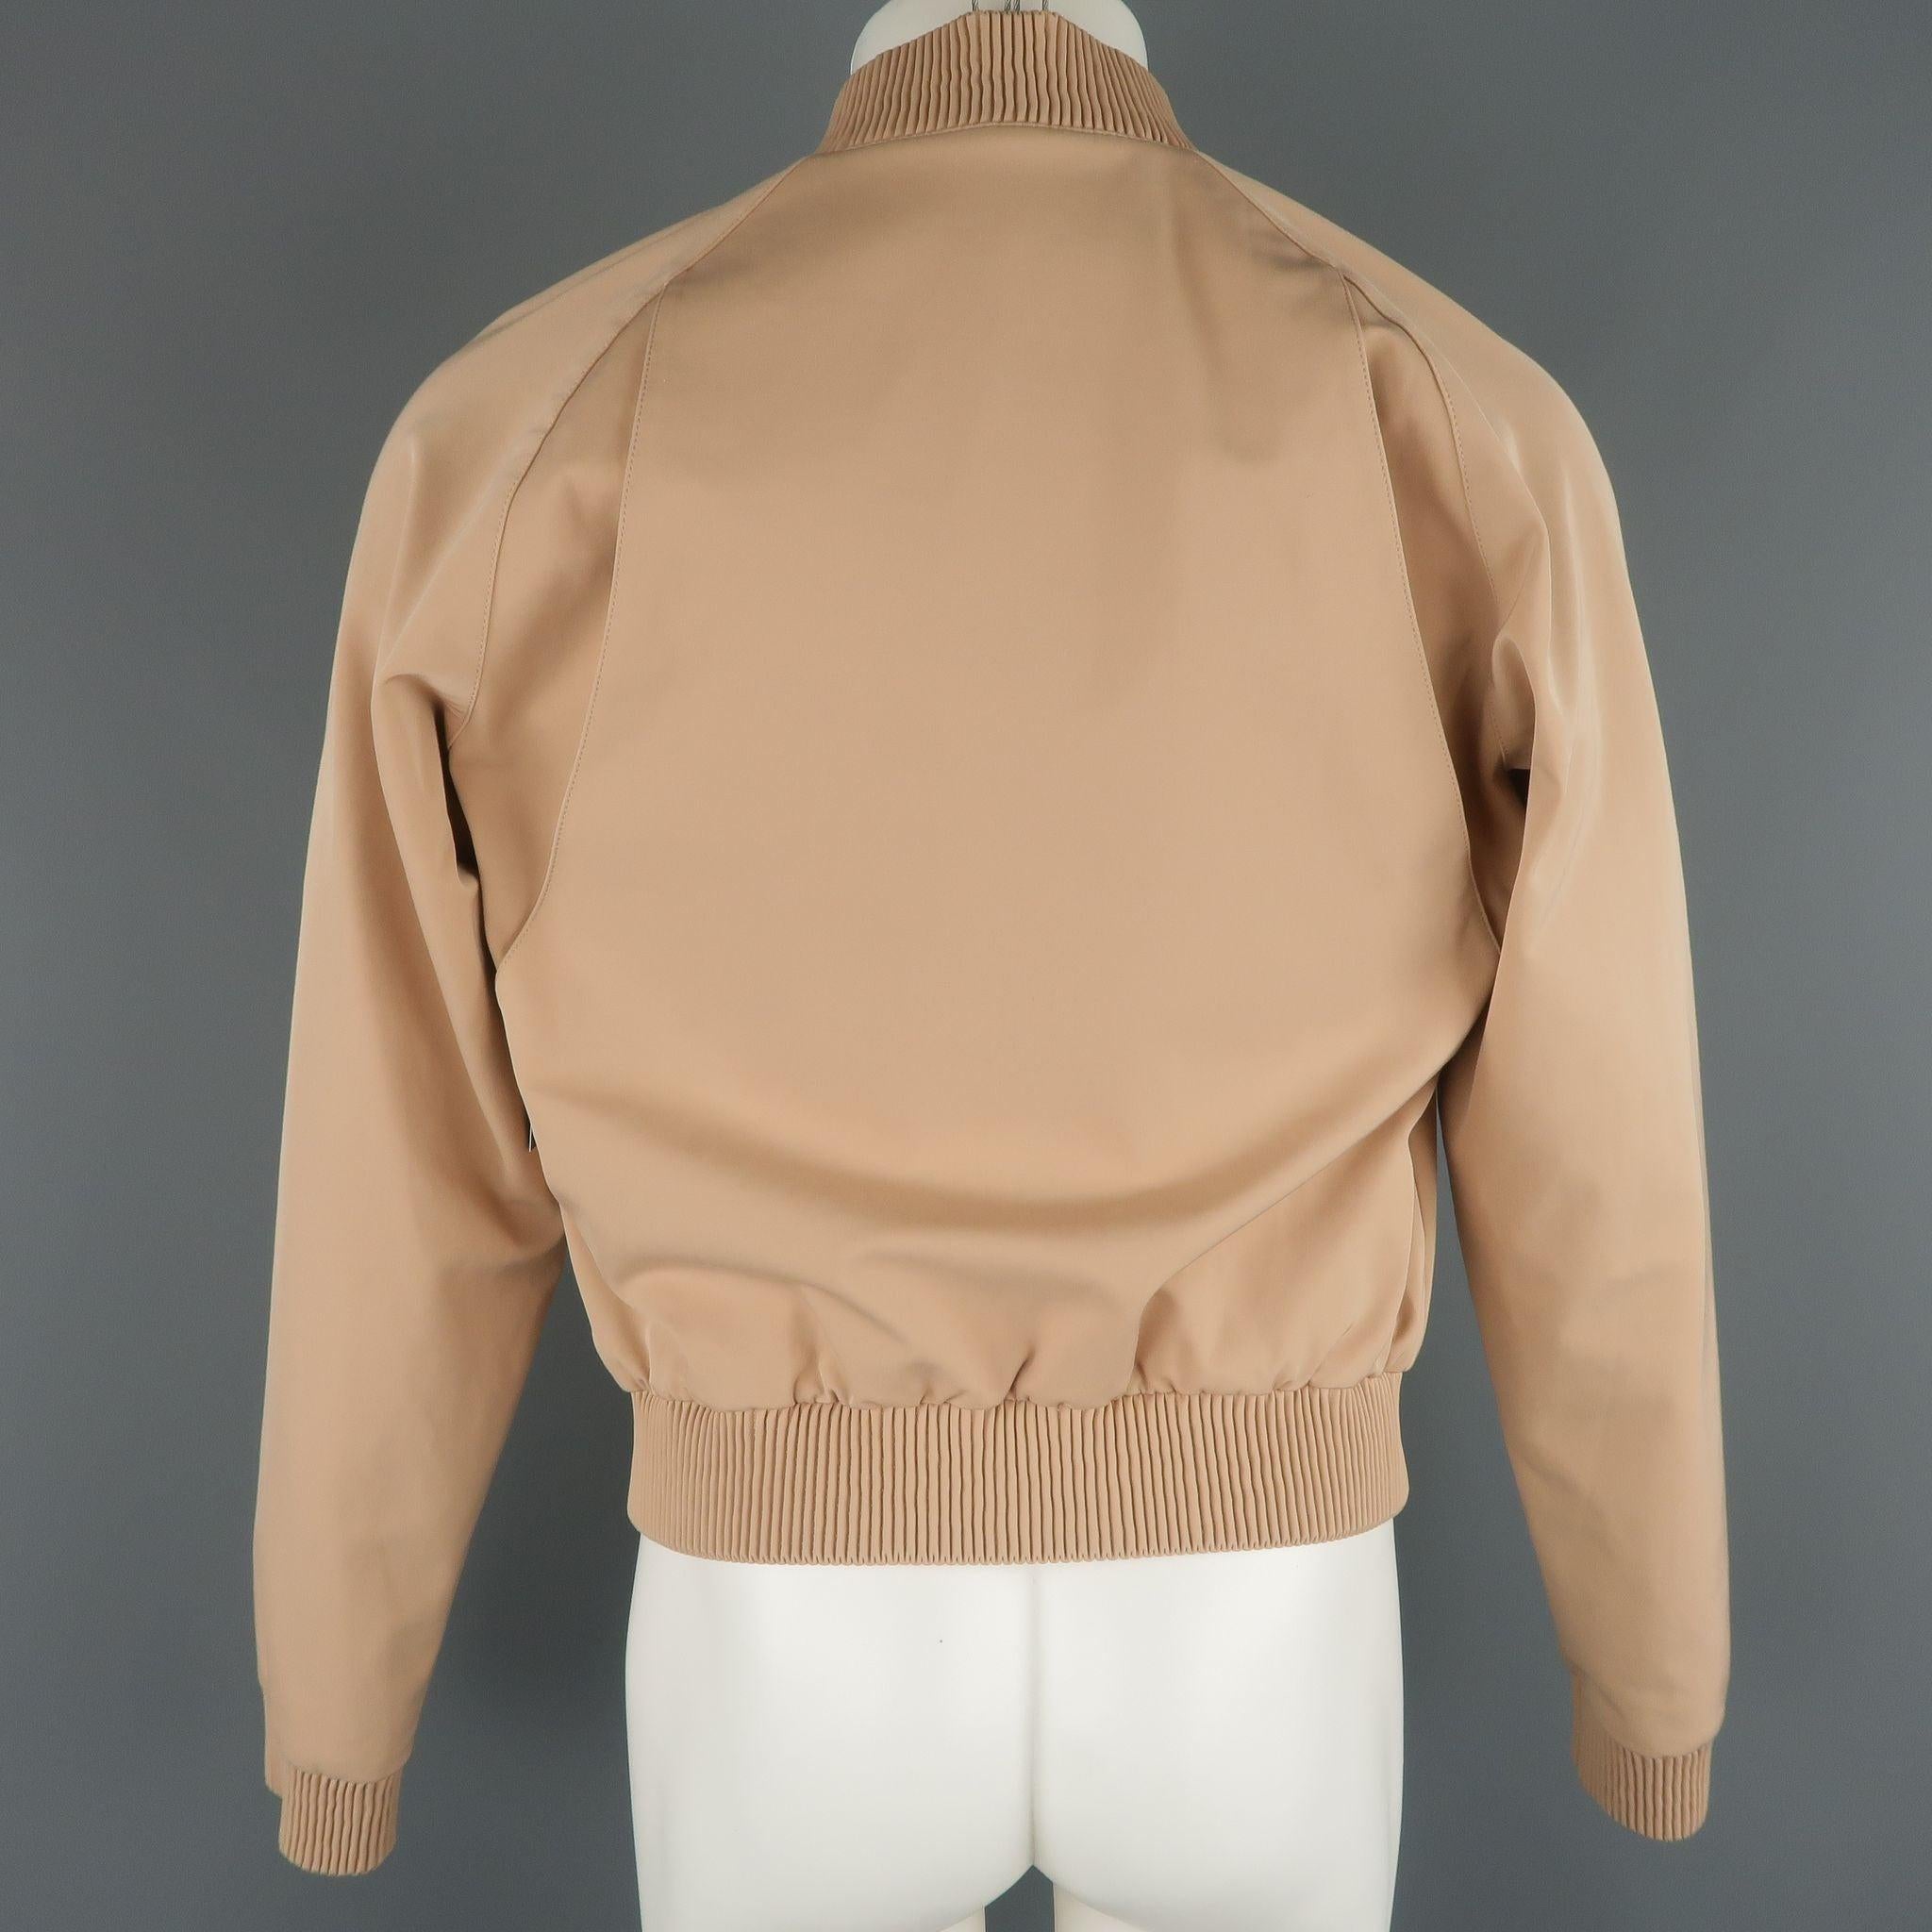 CALVIN KLEIN COLLECTION Spring 2015 Runway 38 Blush Nude Tan Bomber Jacket For Sale 3